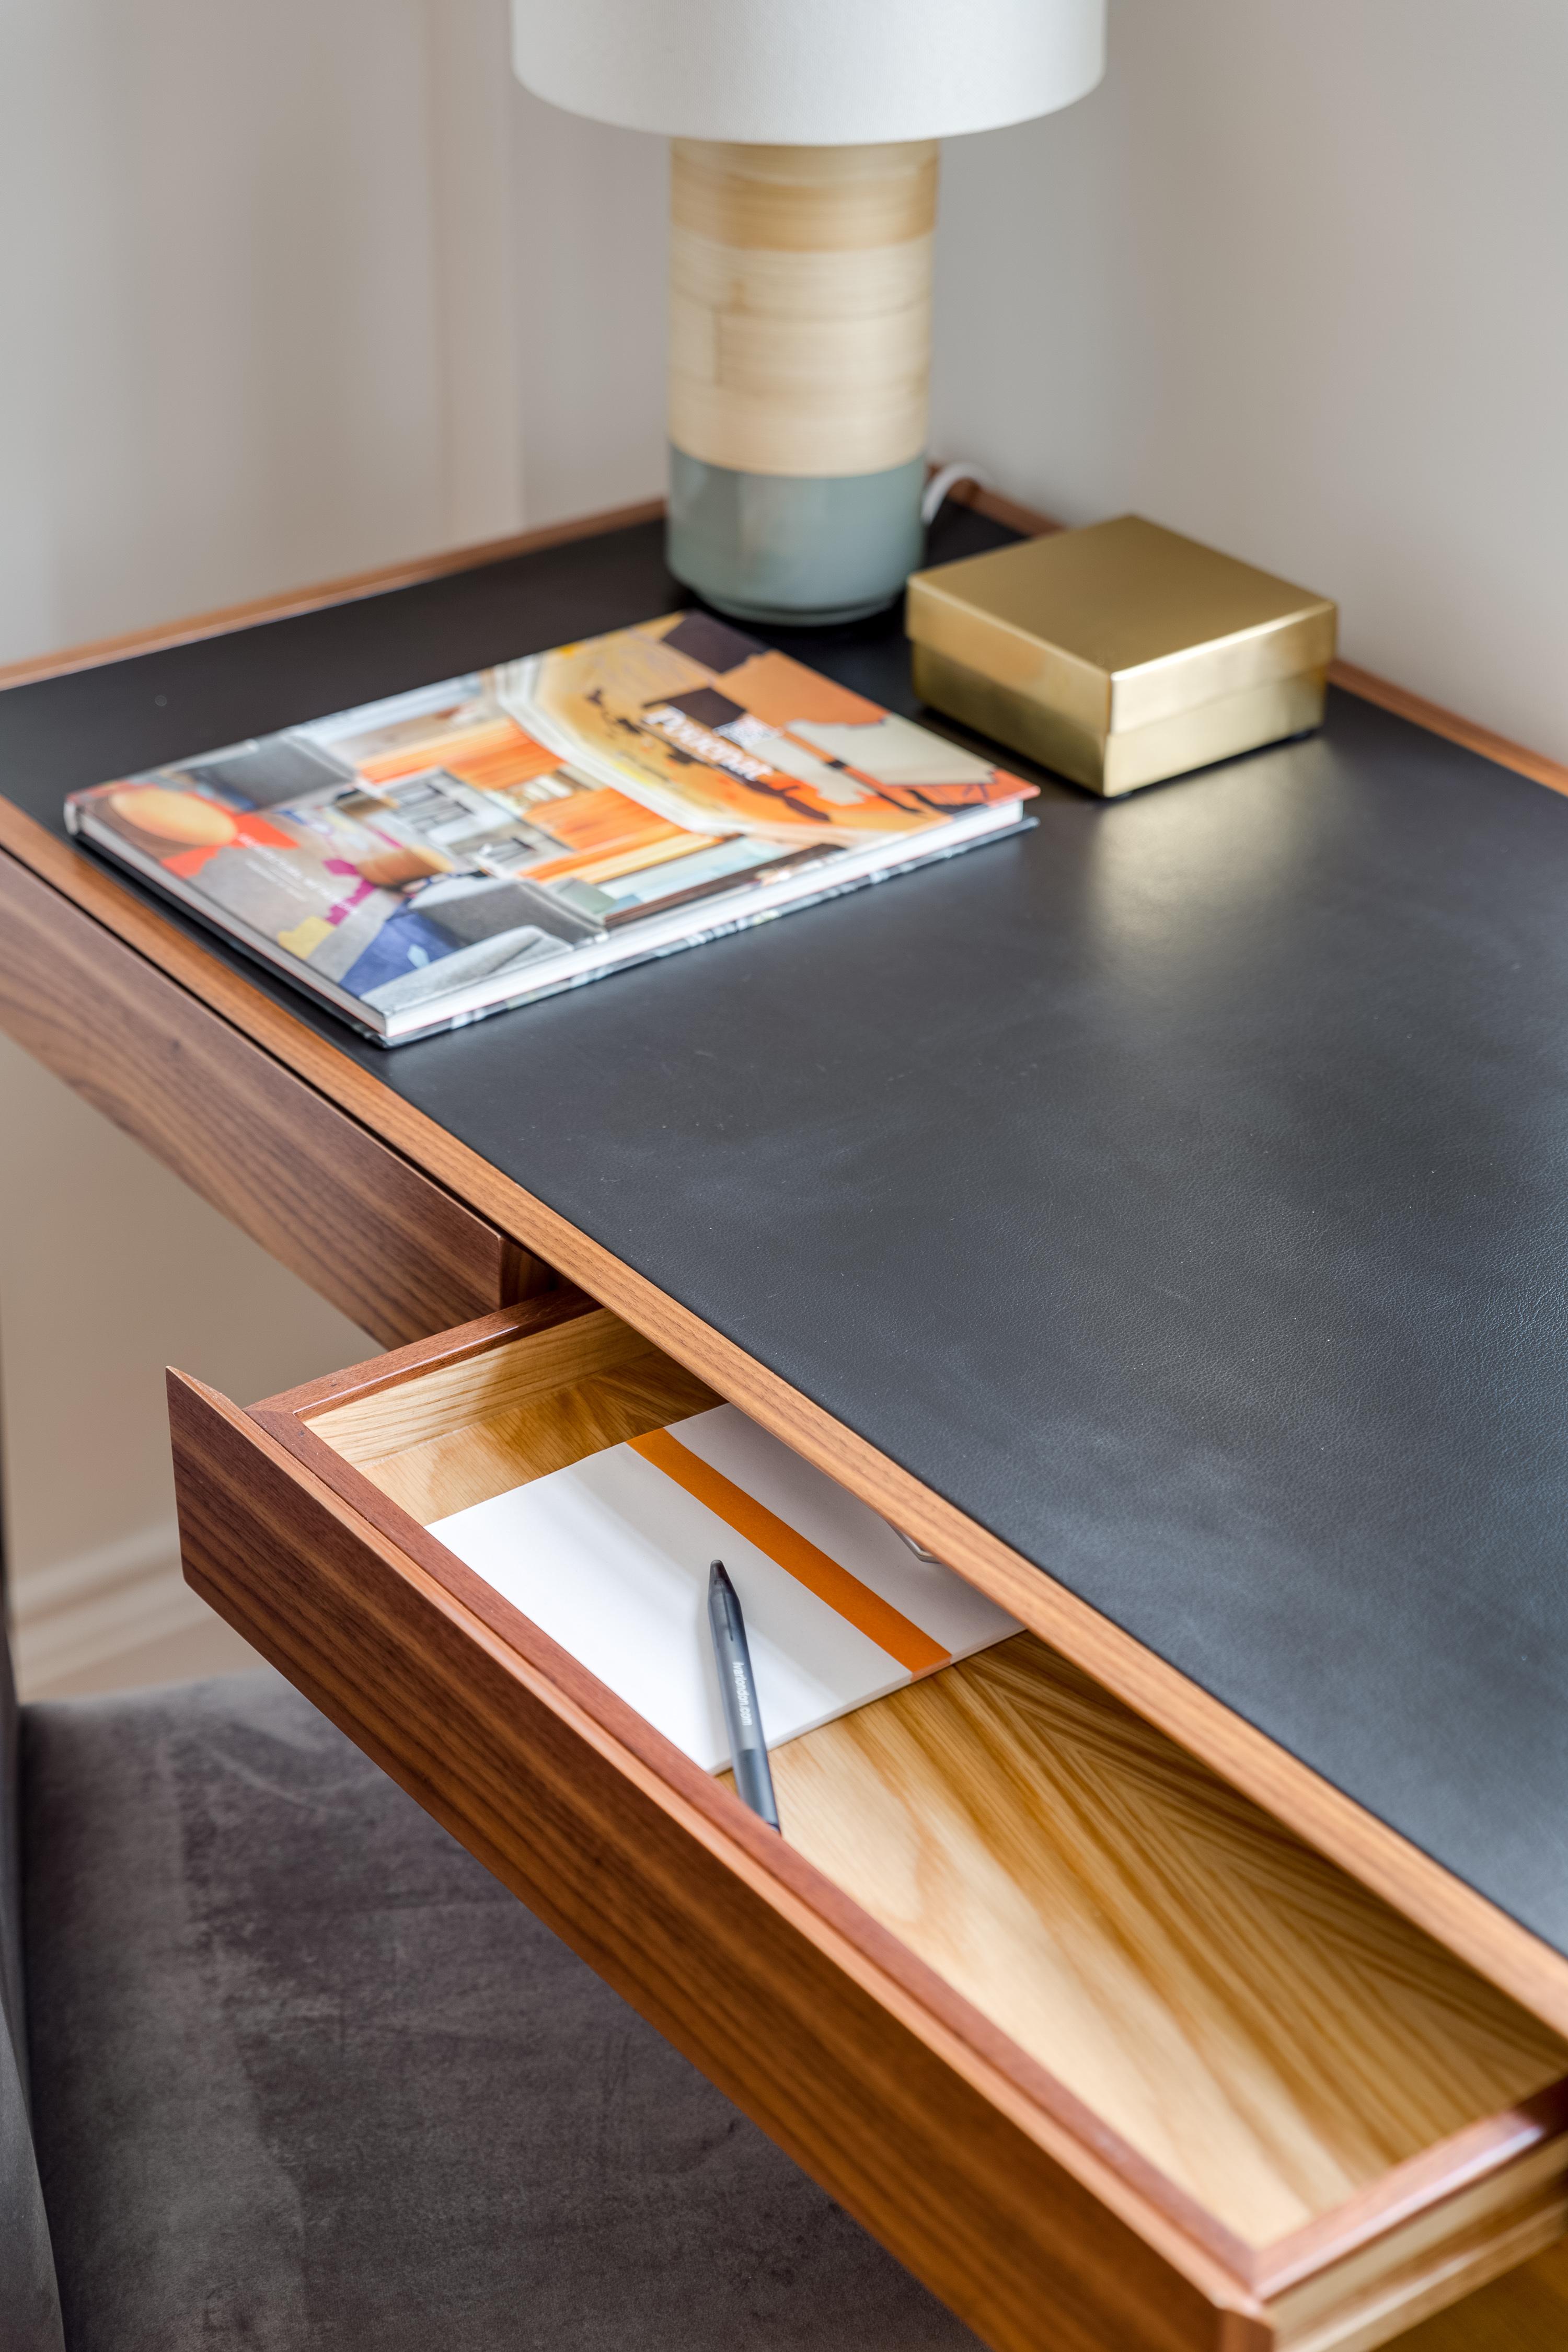 As with all our furniture, this desk is made to order and is therefore highly customisable, including in size and finish. The customisation fee is only 10%, which is added to the retail price.

The desk feature three drawers. The internal of the